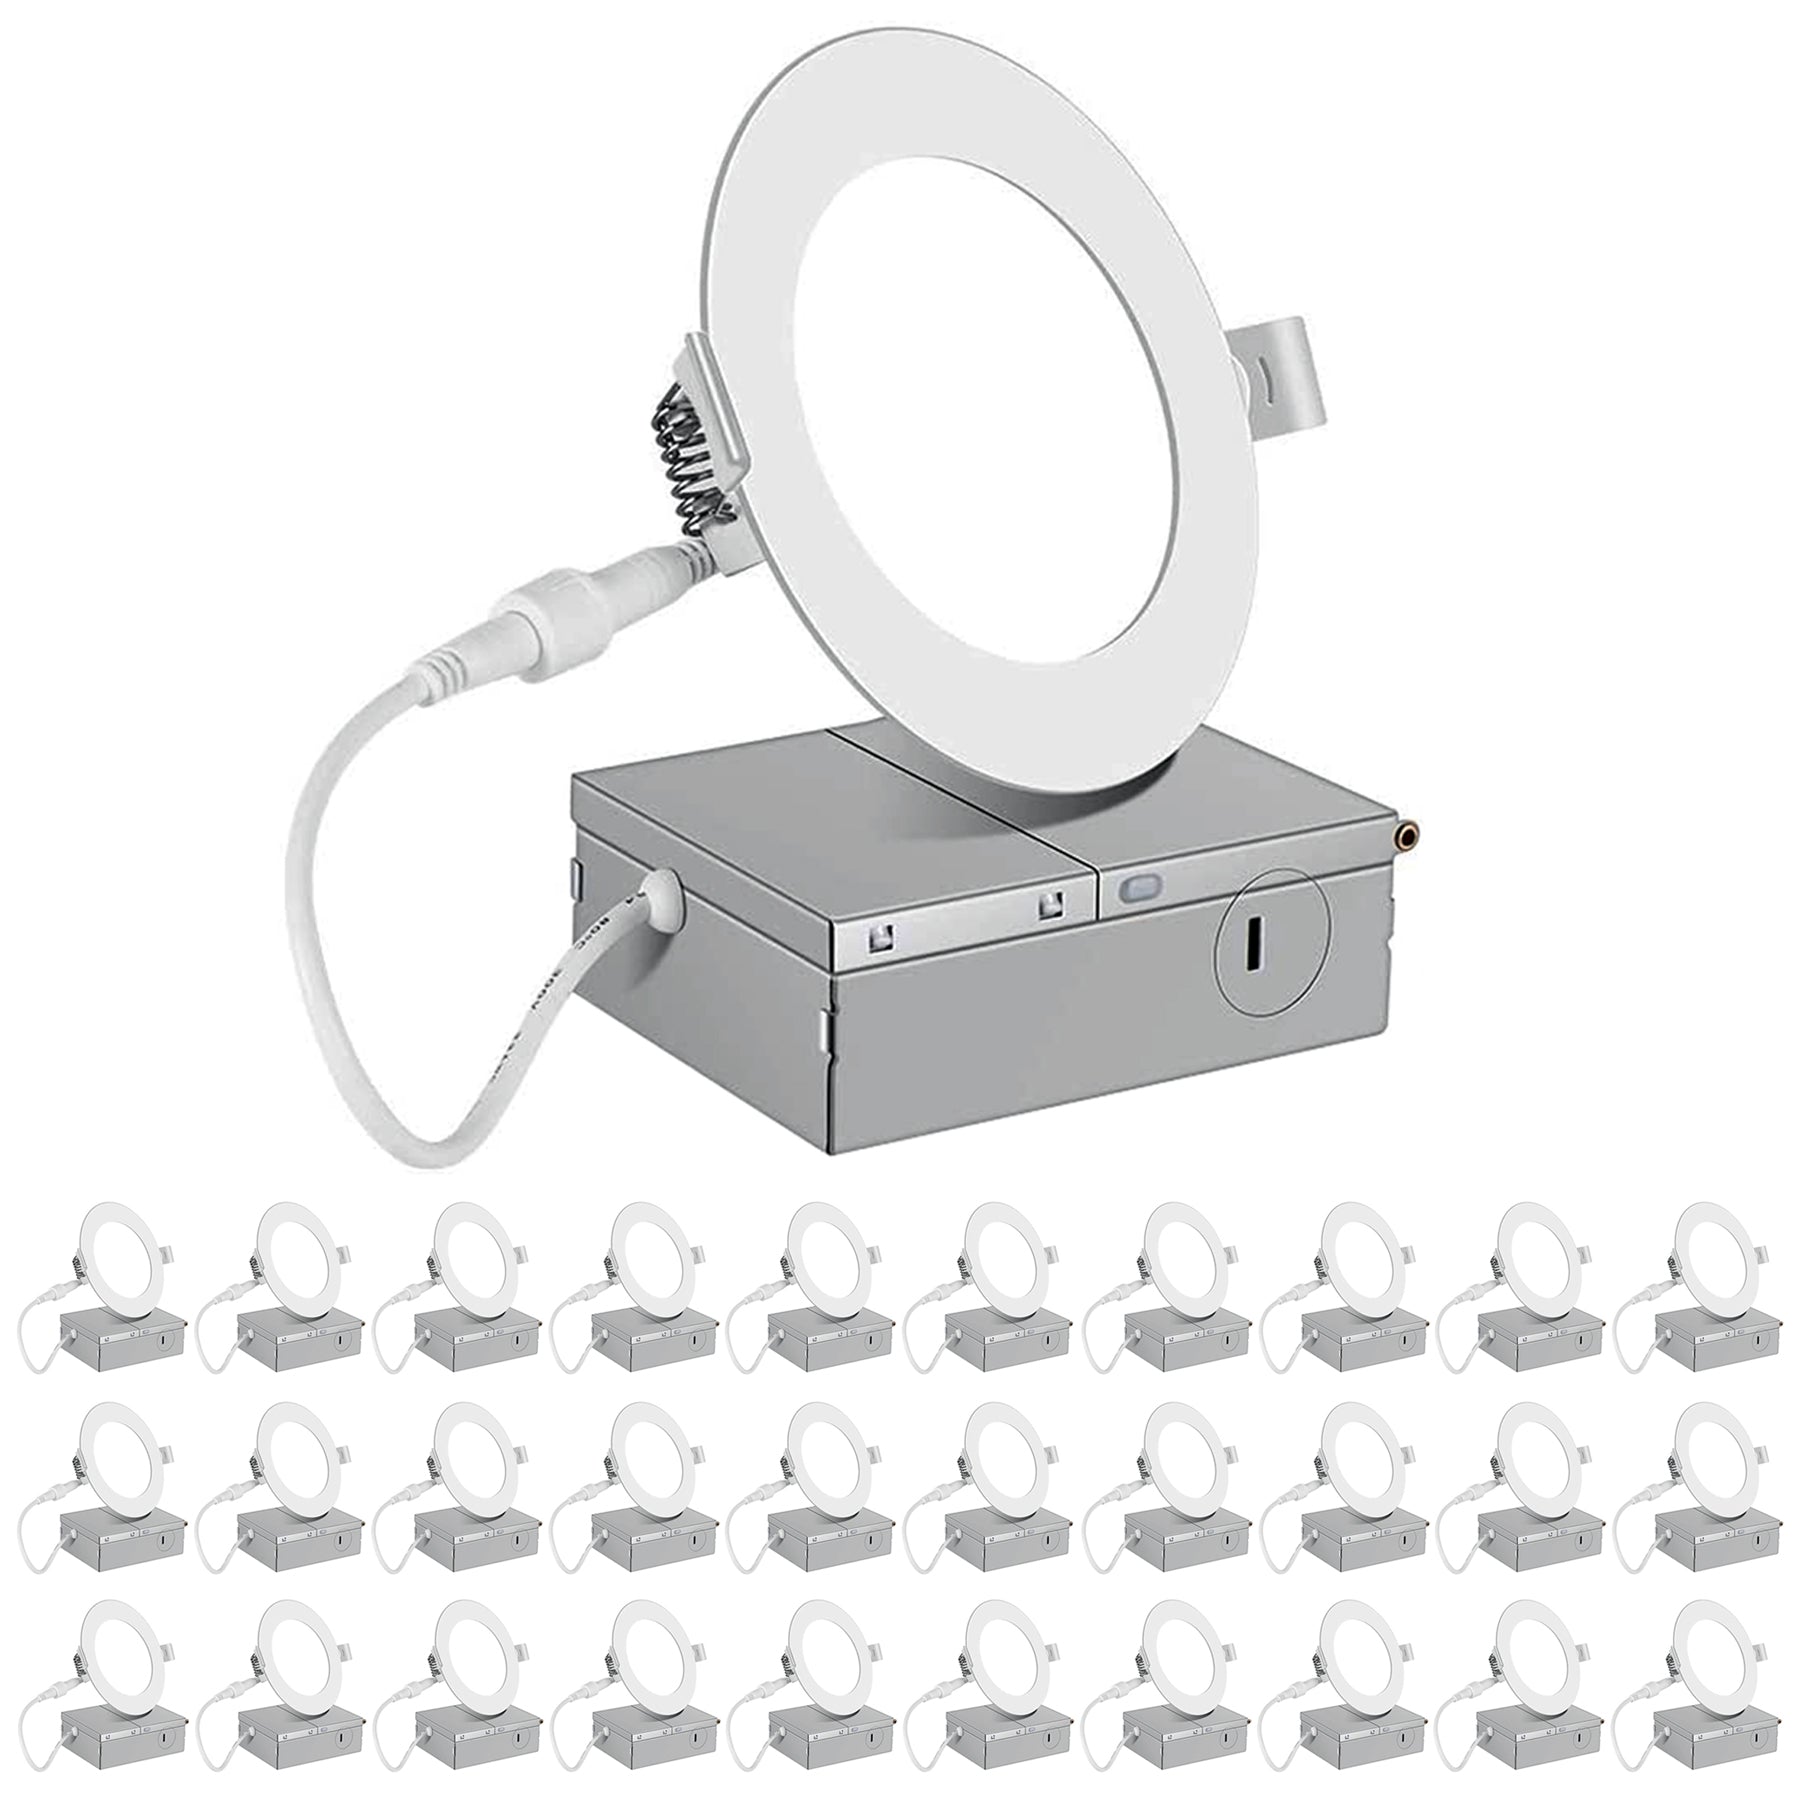 4 Inch 30 Pack (9 Watt 700 Lumens), LED Ceiling Lights with Junction Box